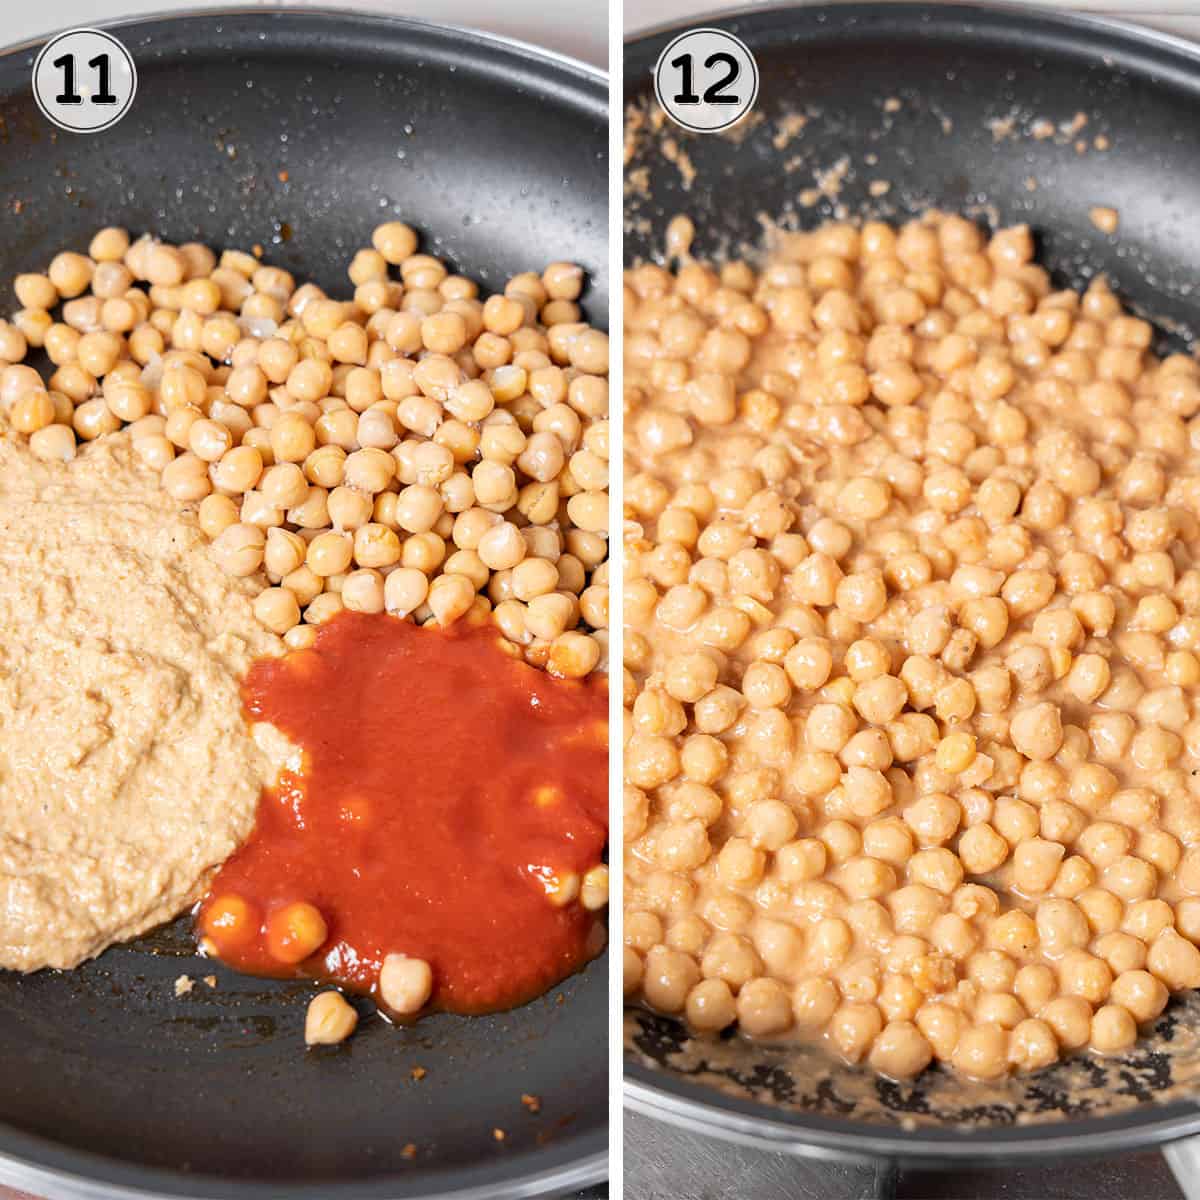 adding the bread puree and tomato puree to the pan of chickpeas.